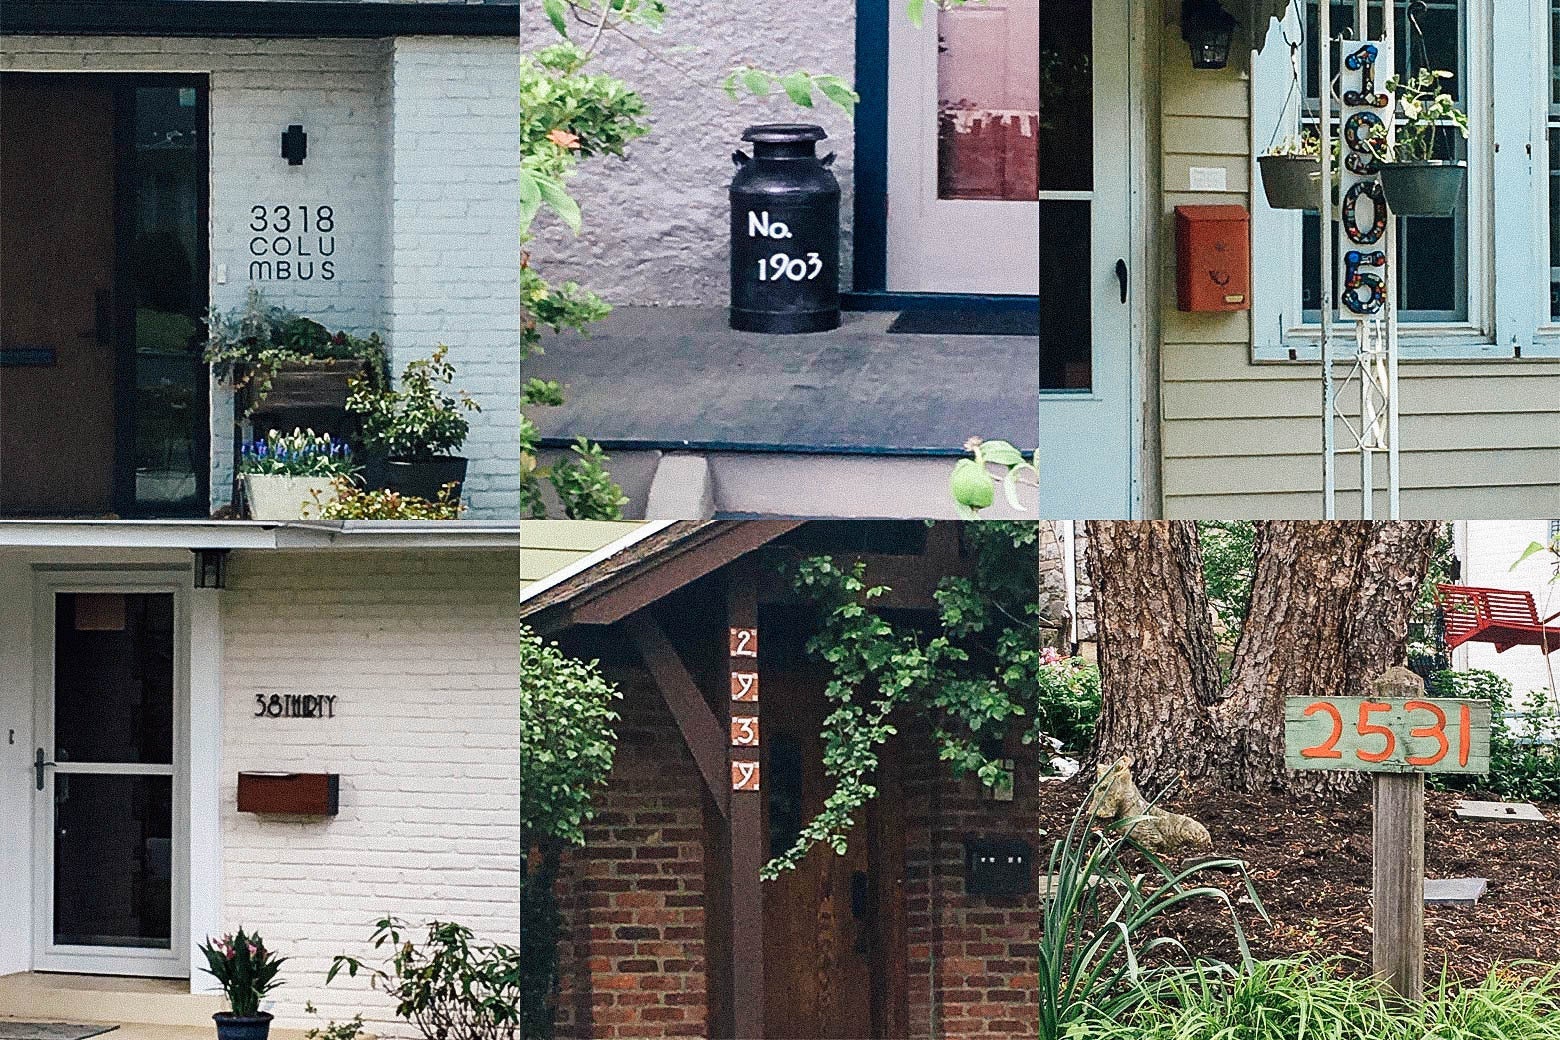 Six interesting house numbers.